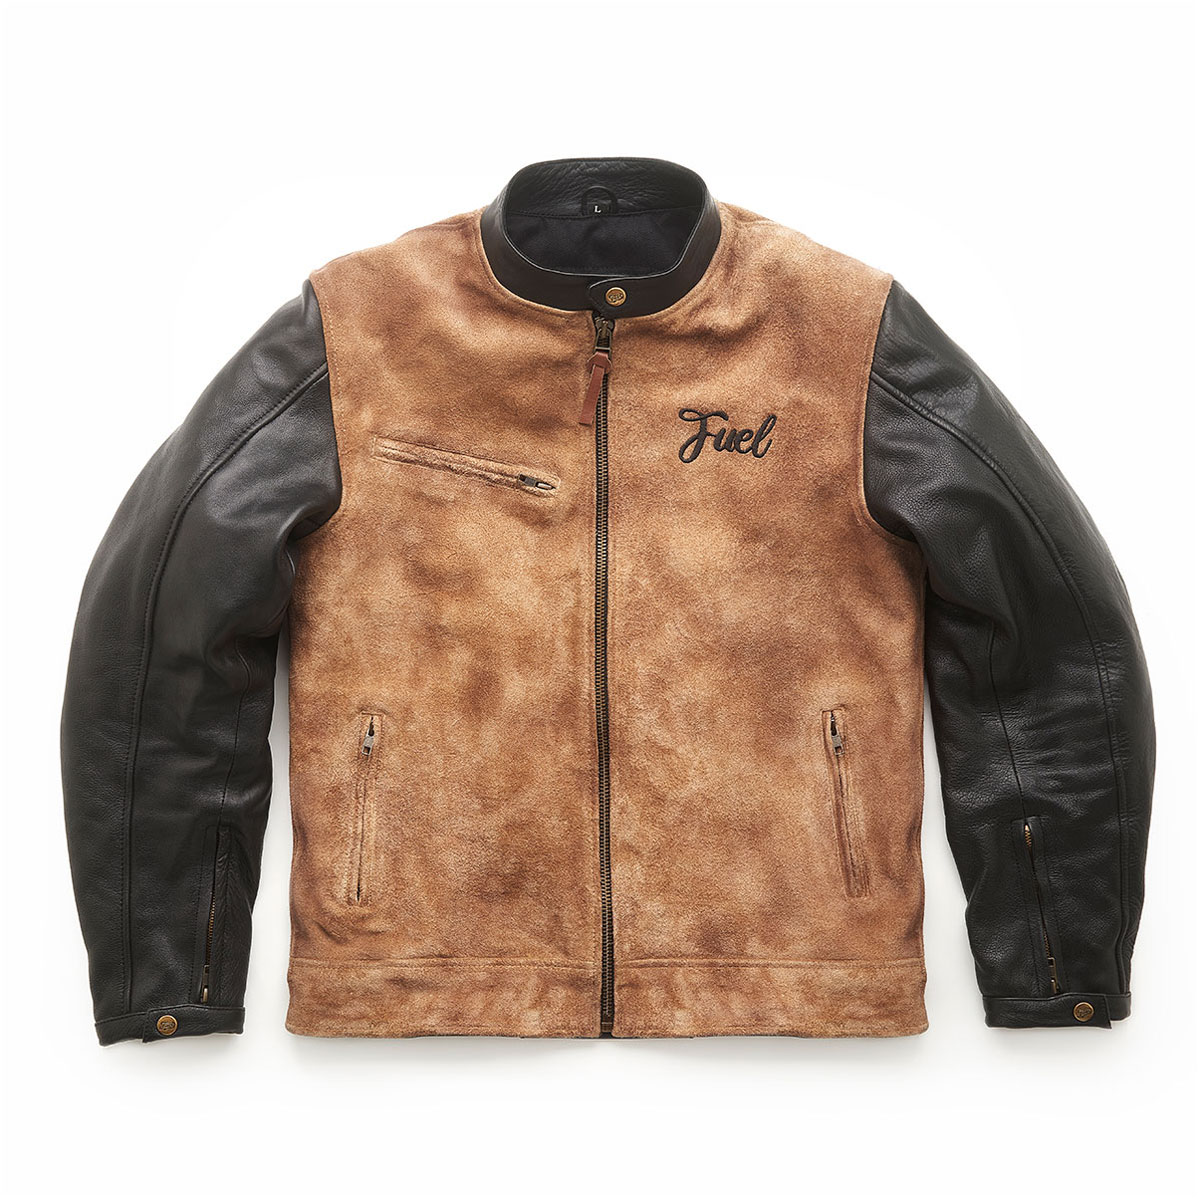 Fuel Leather Jackets